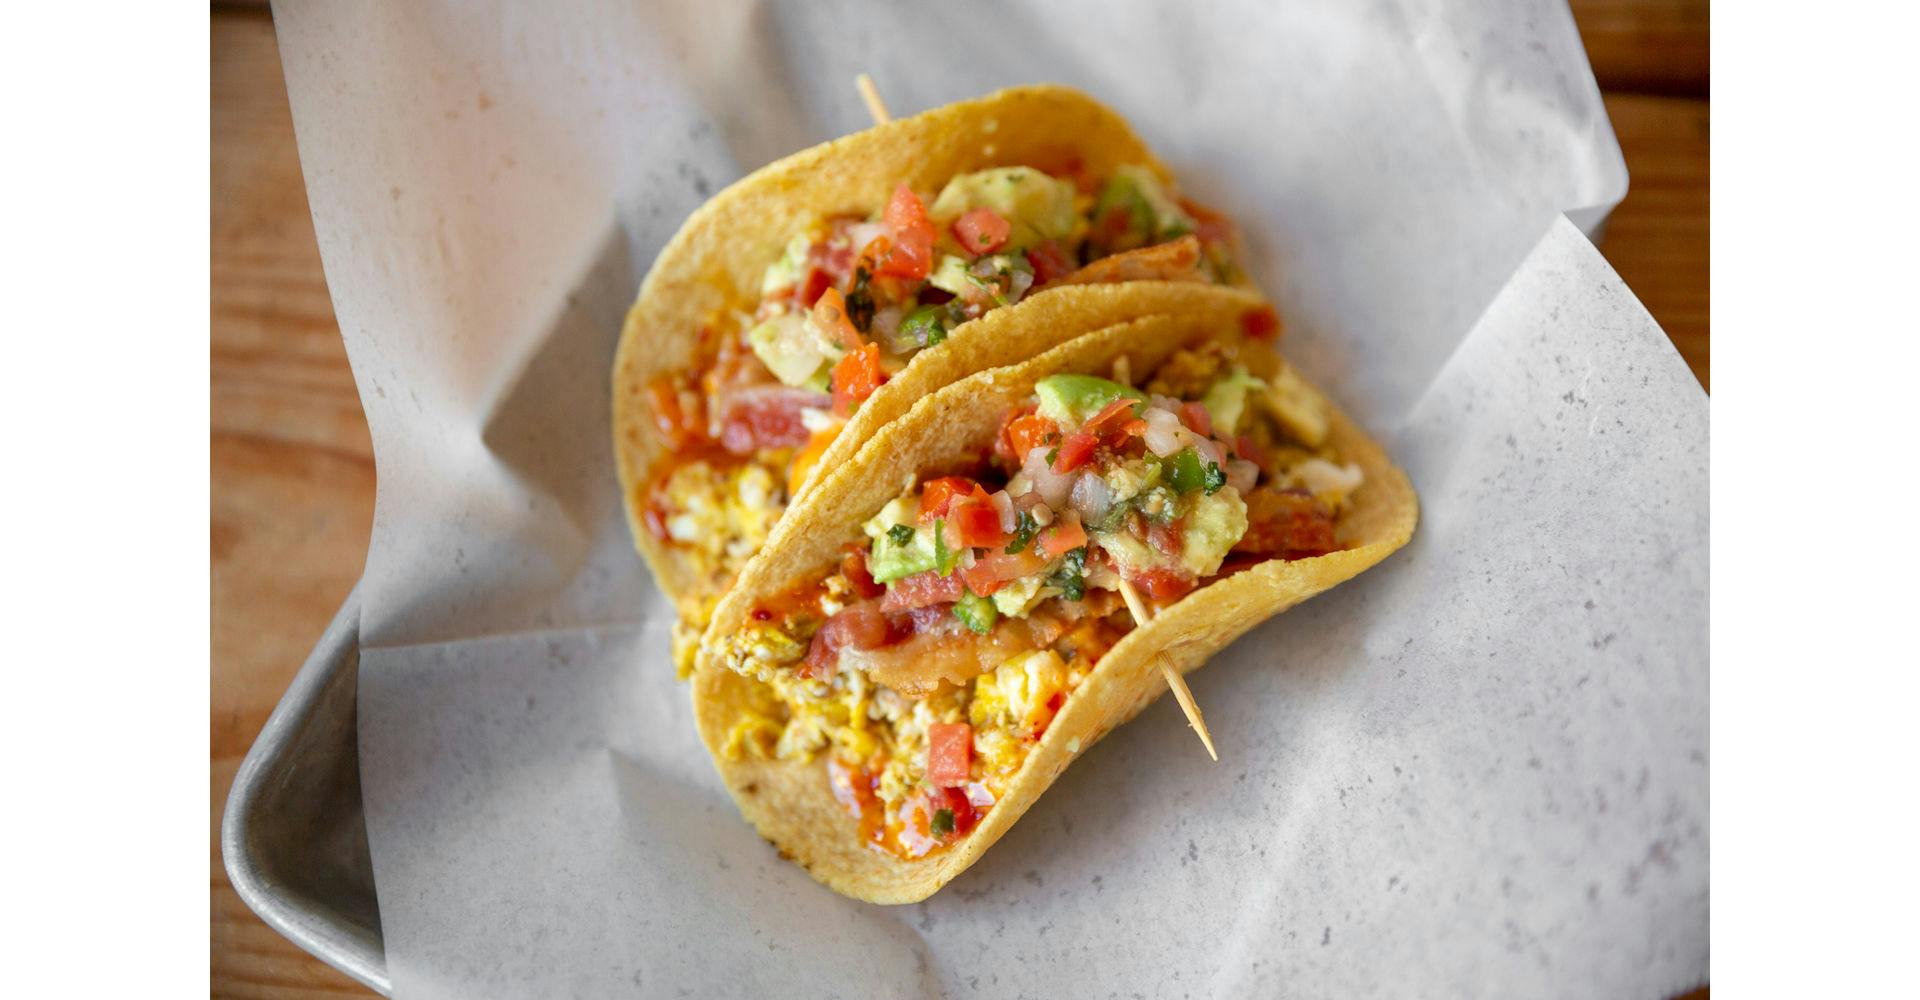 Breakfast Tacos from Bites Restaurant in Forest Grove, OR